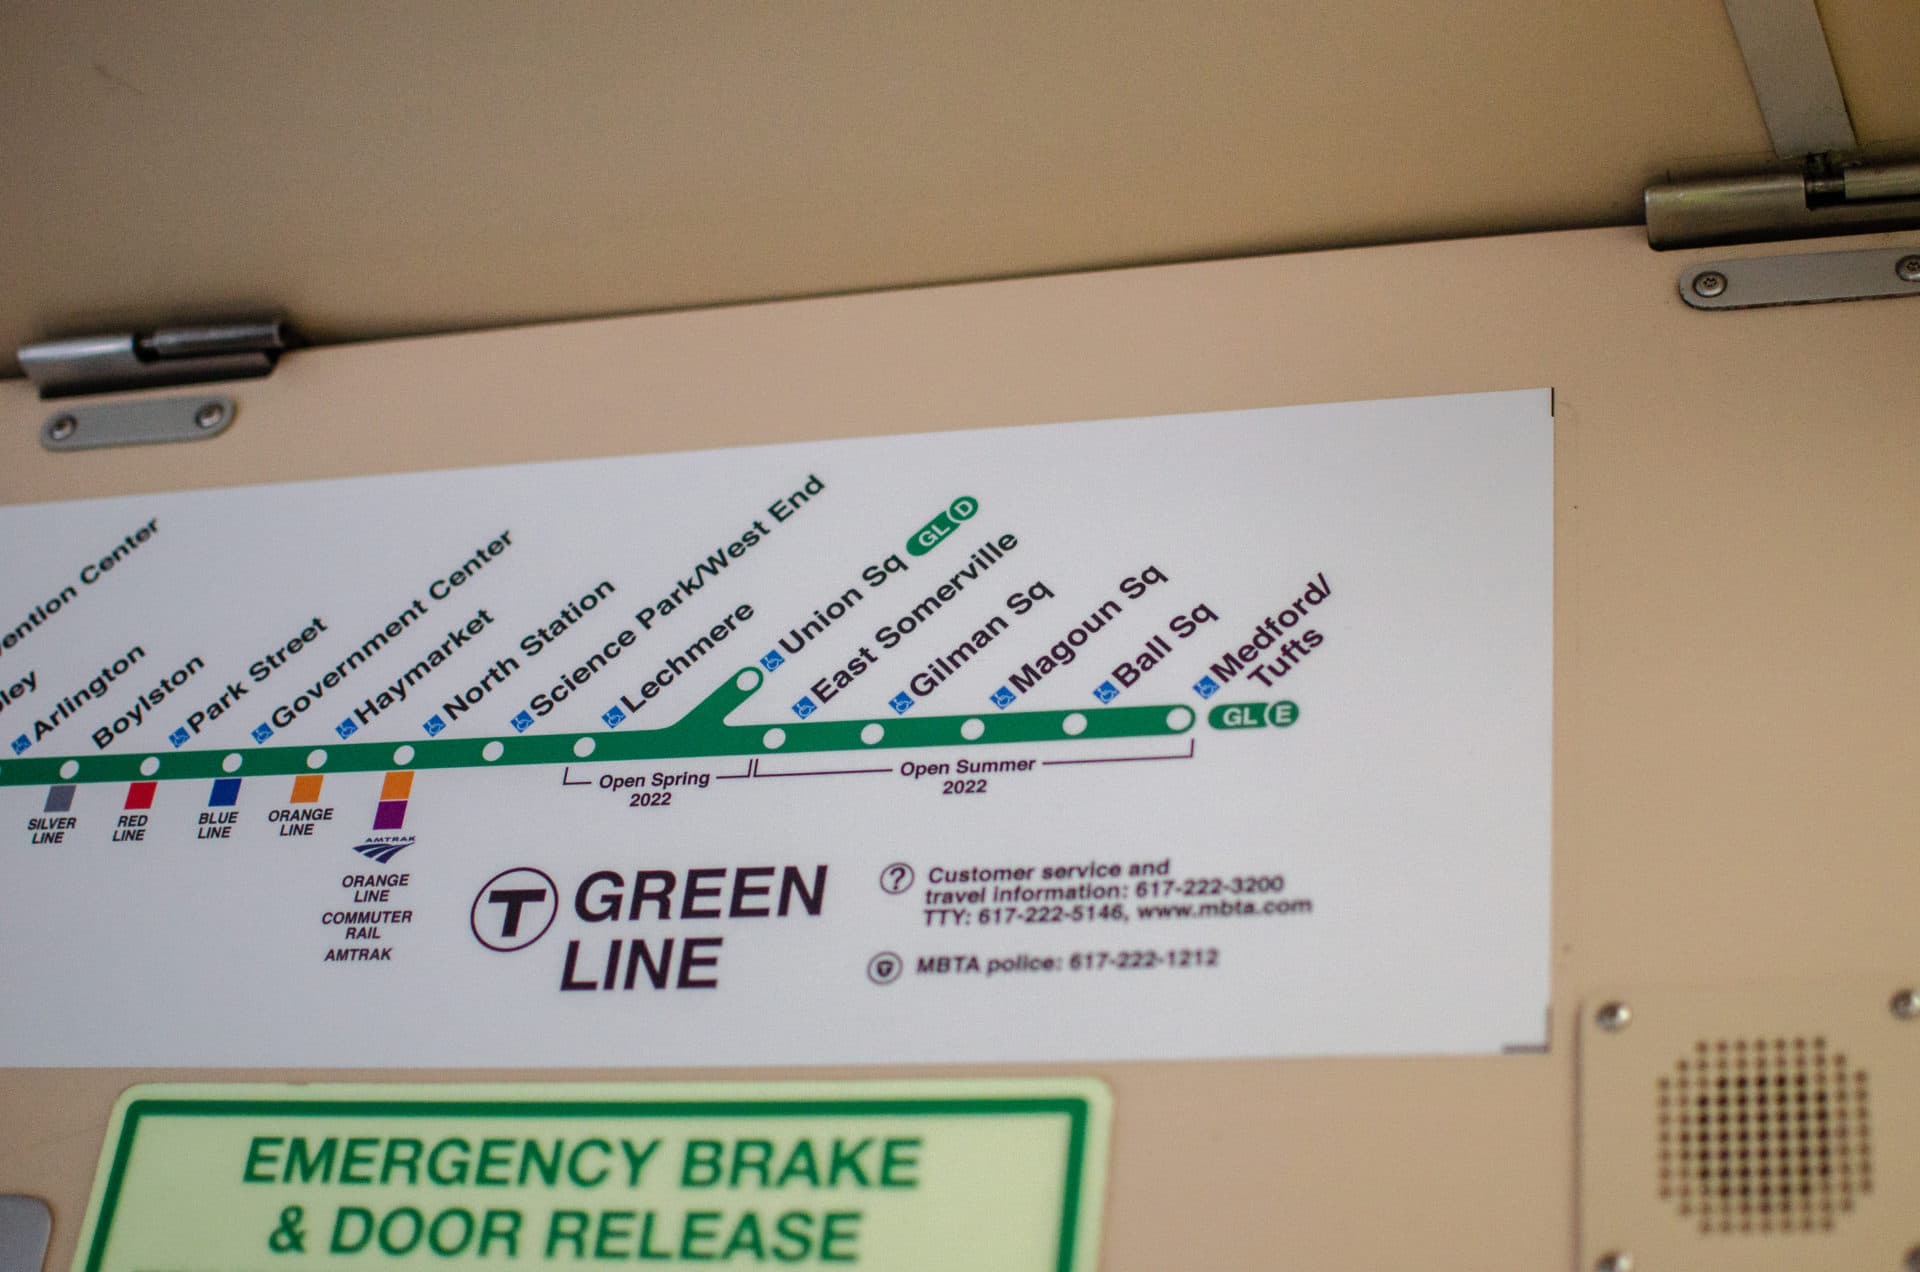 The updated MBTA Green Line route sign including the stops on the Green Line extension, in a trolley making a test ride between Lechmere and Union Square. (Sharon Brody/WBUR)